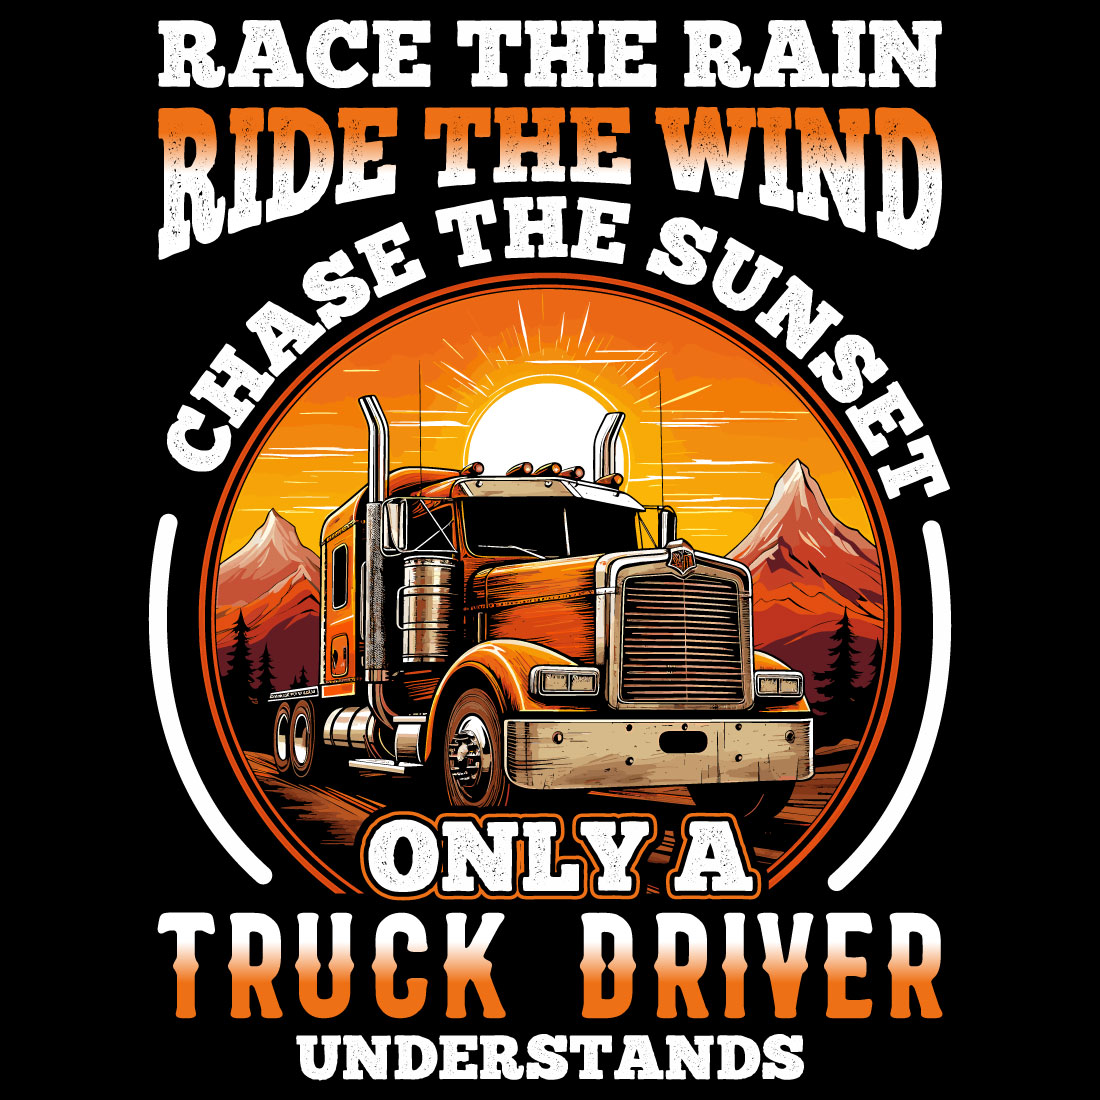 race the rain ride the wind chase the sunset only a truck driver understands, truck driver t shirt design cover image.